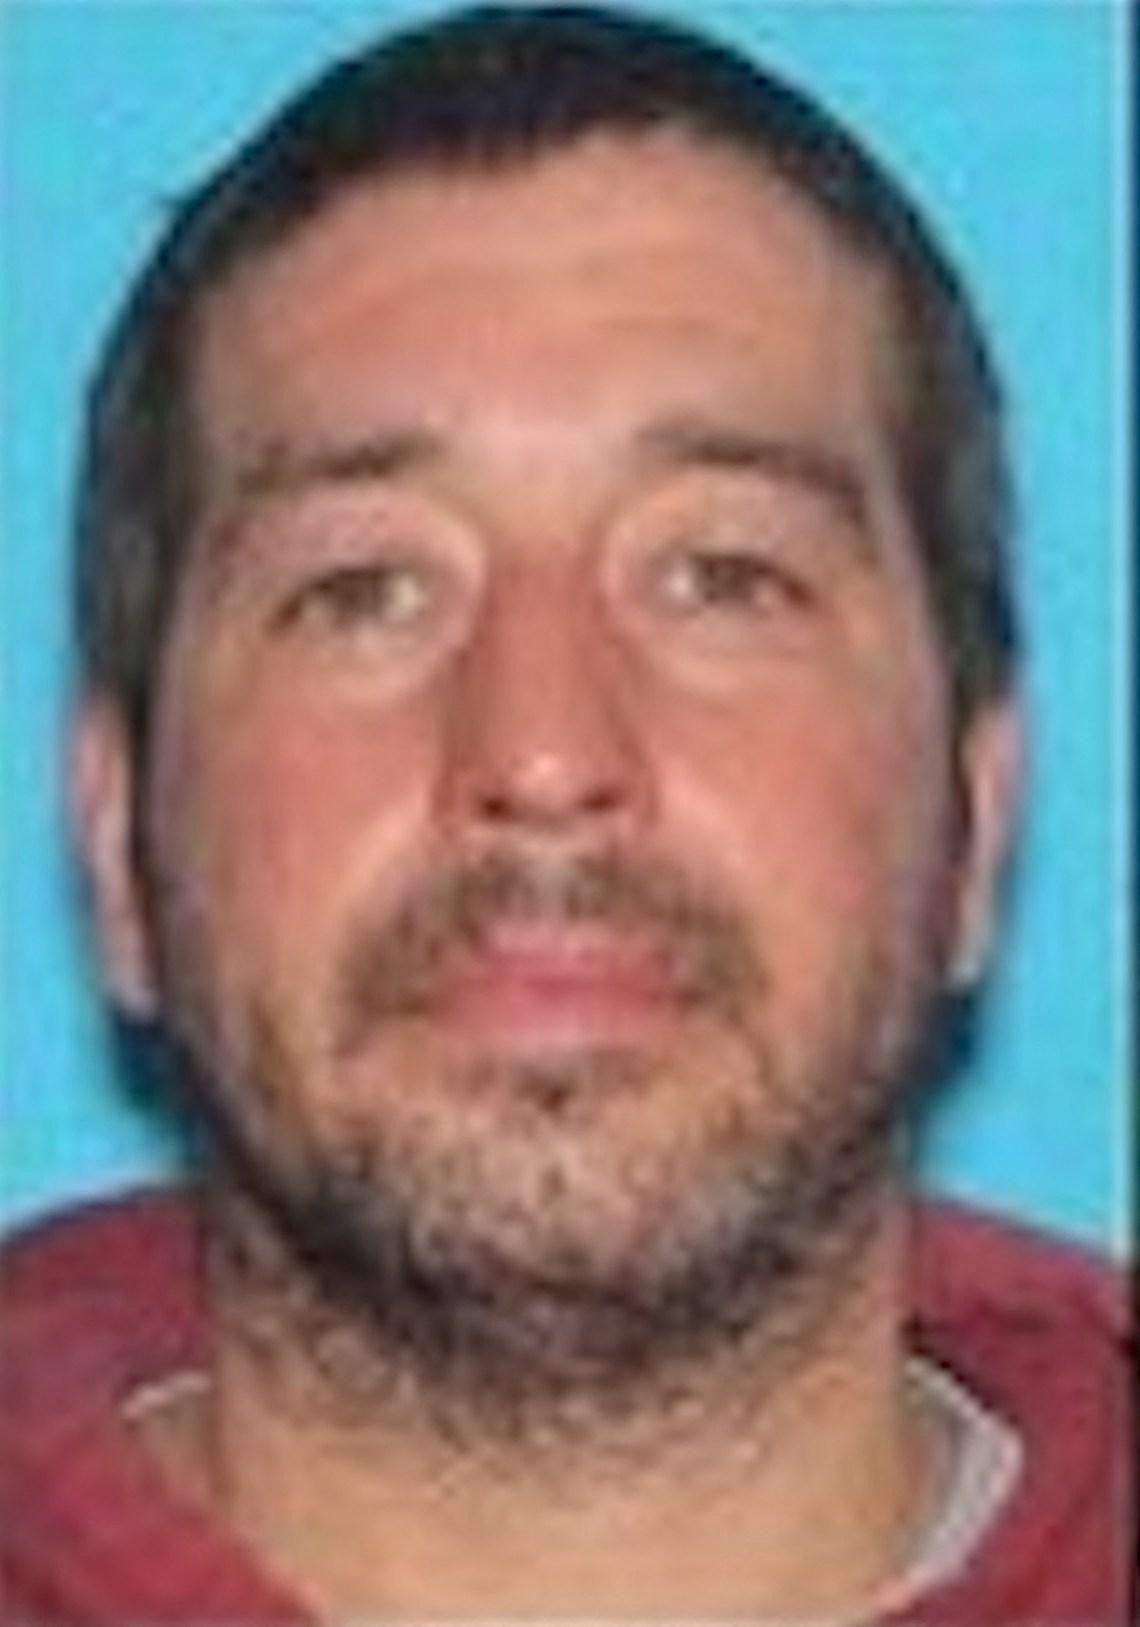 Maine Mass Shooter Remains At Large As Massive Manhunt Is Underway